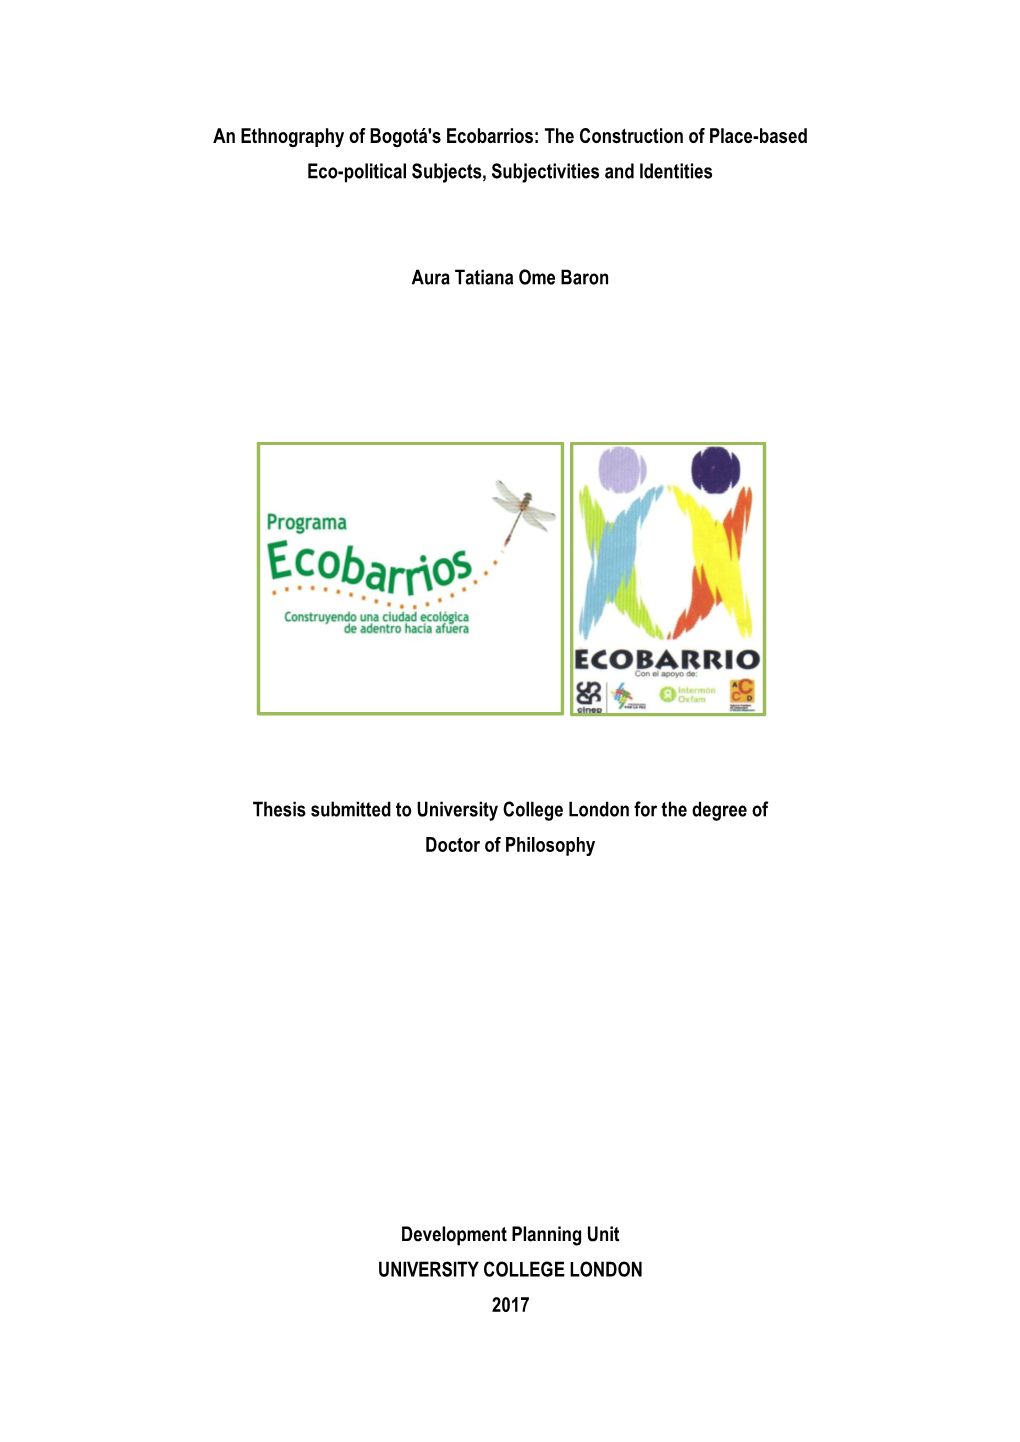 An Ethnography of Bogotá's Ecobarrios: the Construction of Place-Based Eco-Political Subjects, Subjectivities and Identities